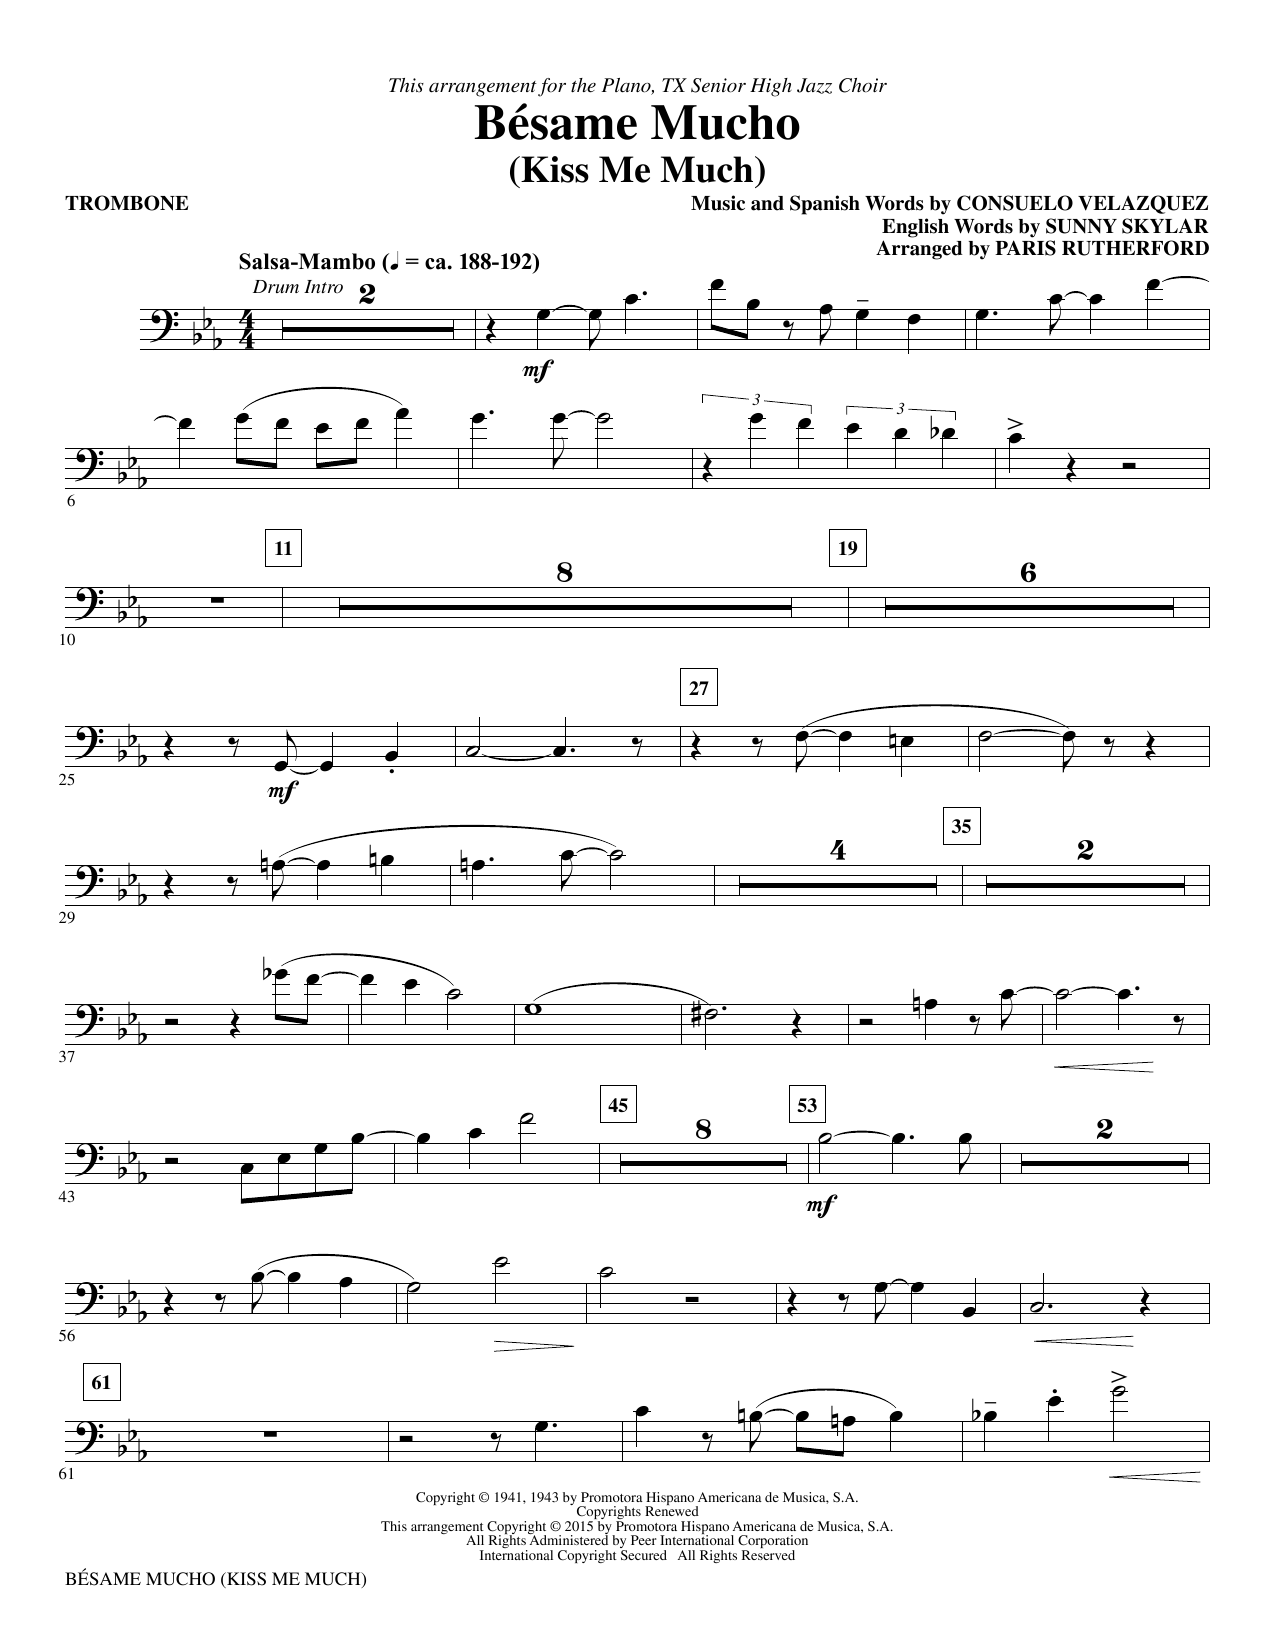 Paris Rutherford Besame Mucho (Kiss Me Much) - Trombone sheet music notes and chords. Download Printable PDF.